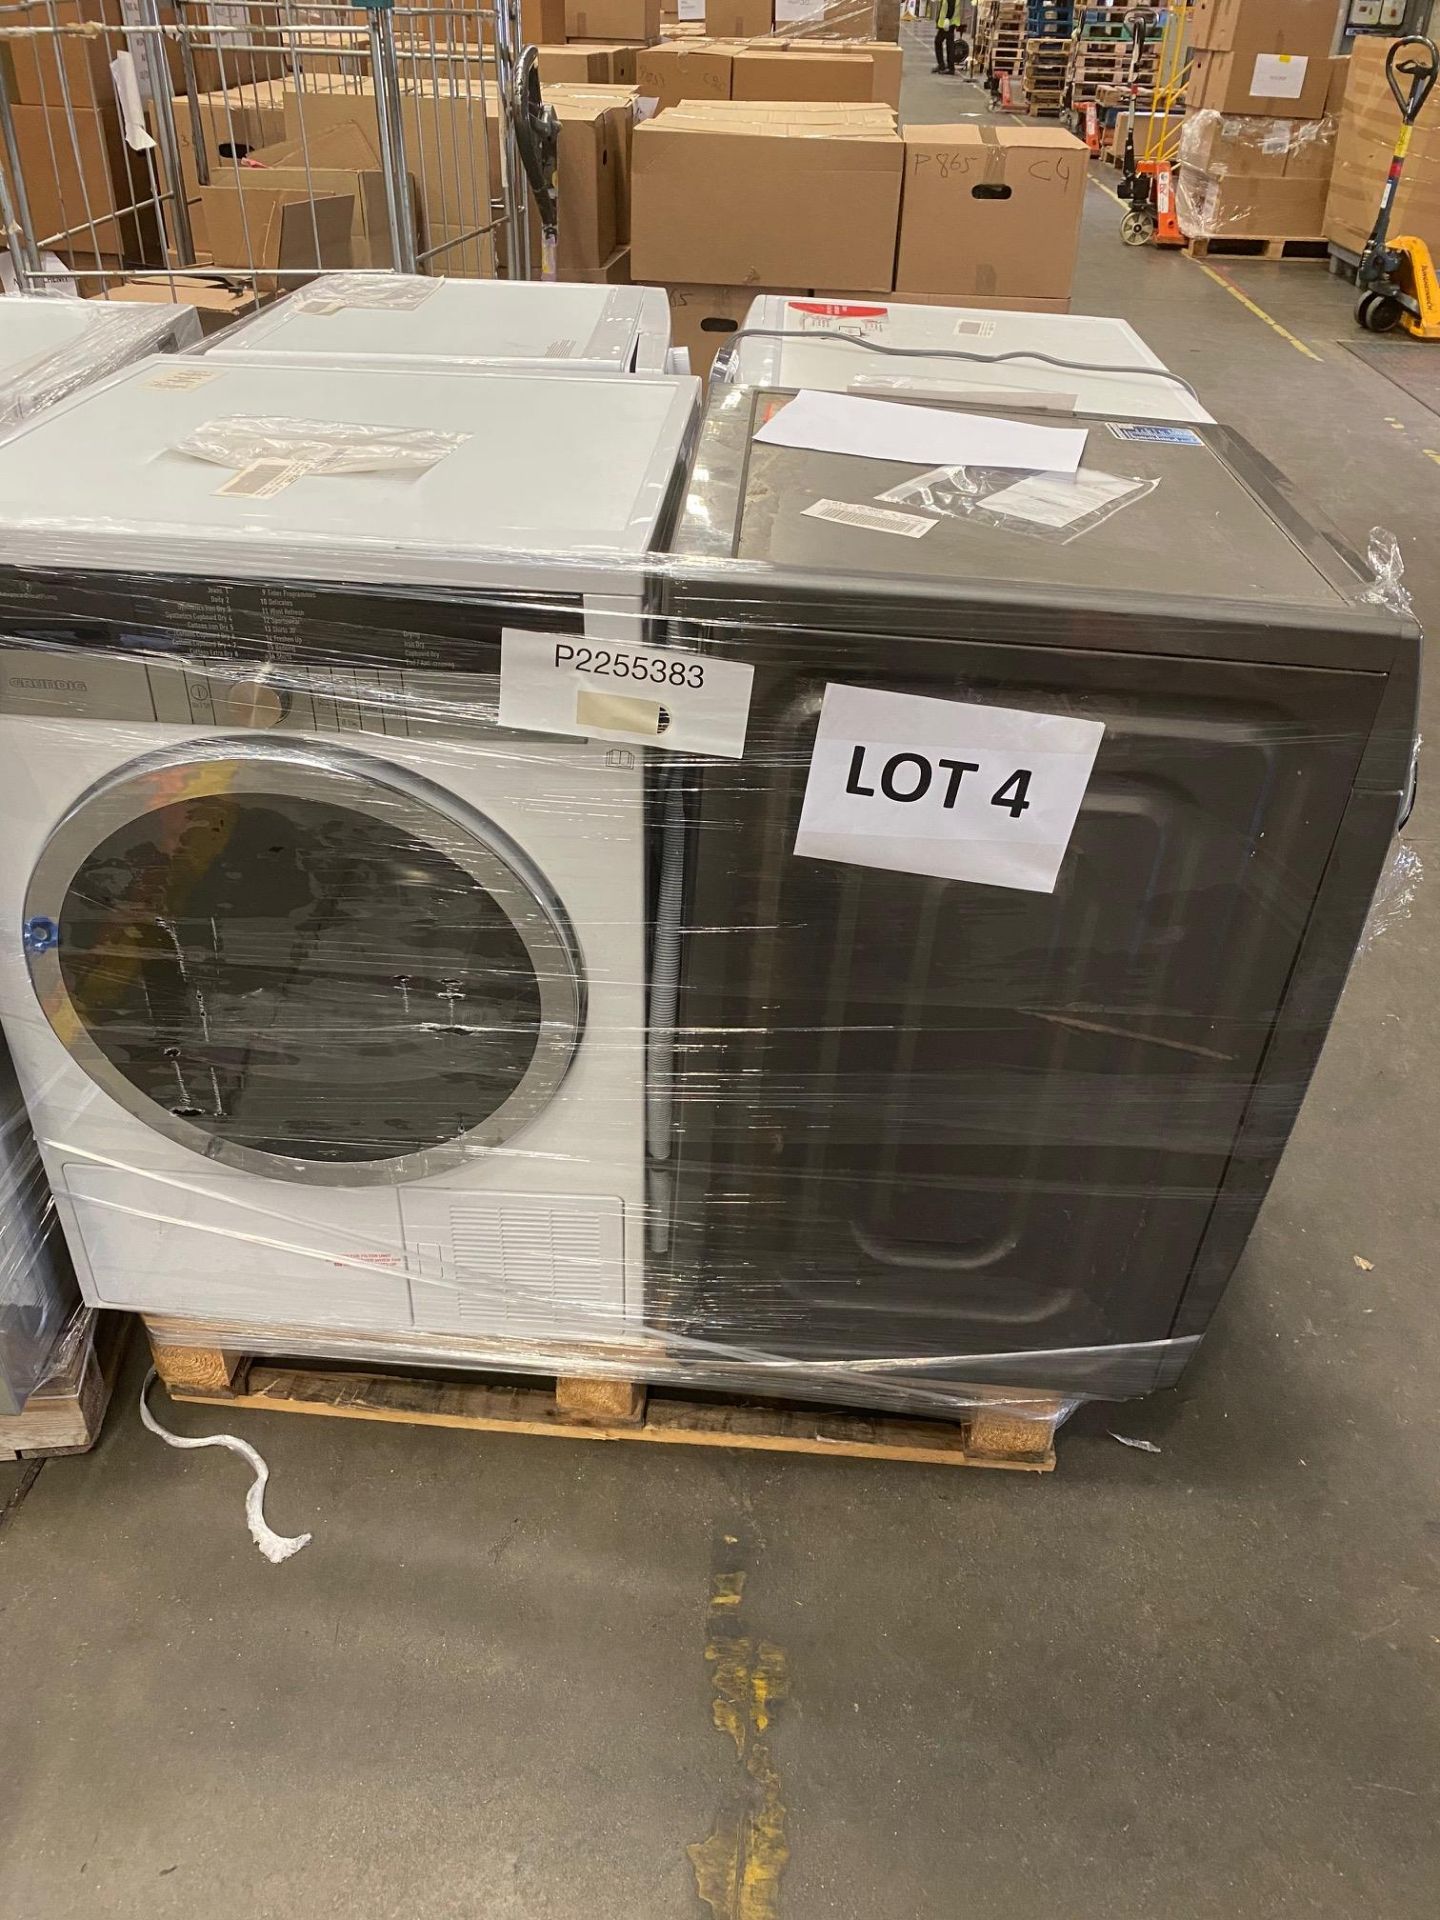 4 Pallets of mixed laundry white goods. Brands Hotpoint, Miele, Samsung, Beko and etc. - Image 9 of 9